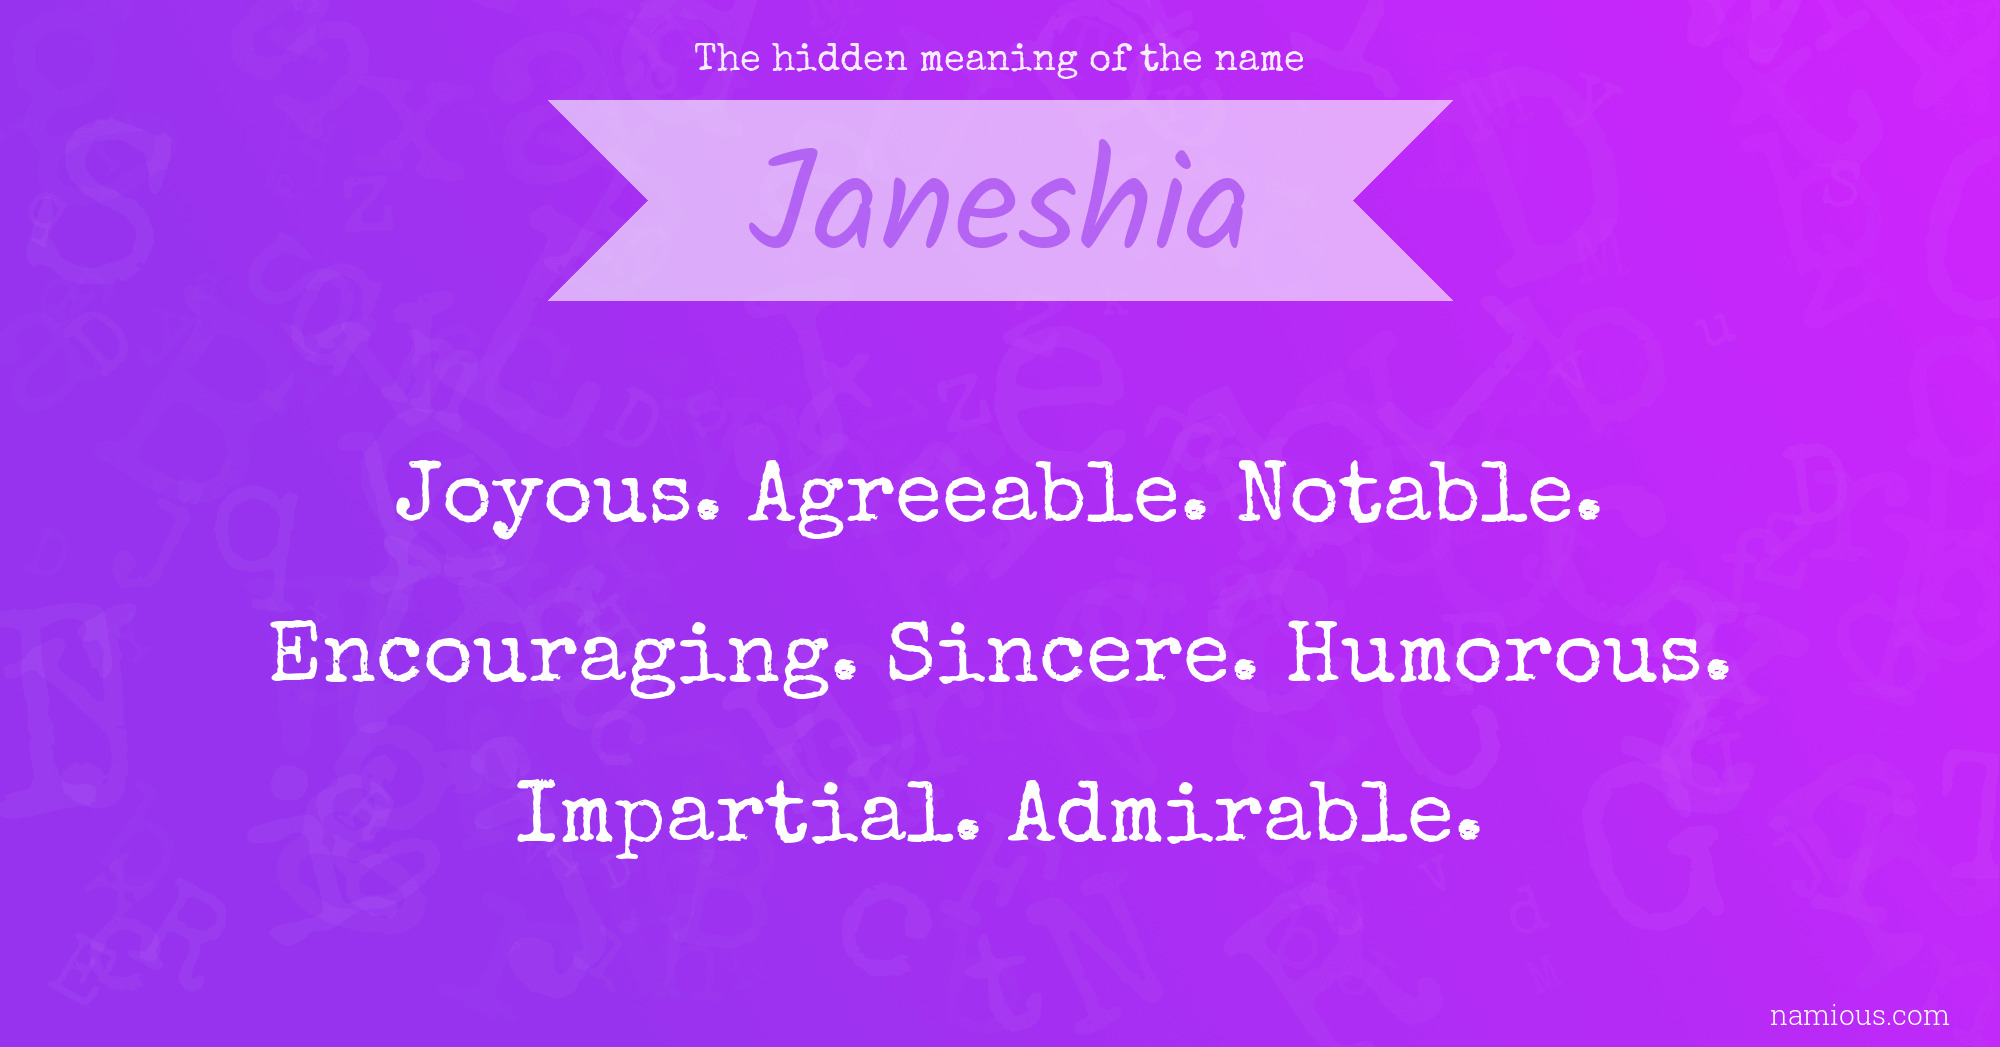 The hidden meaning of the name Janeshia